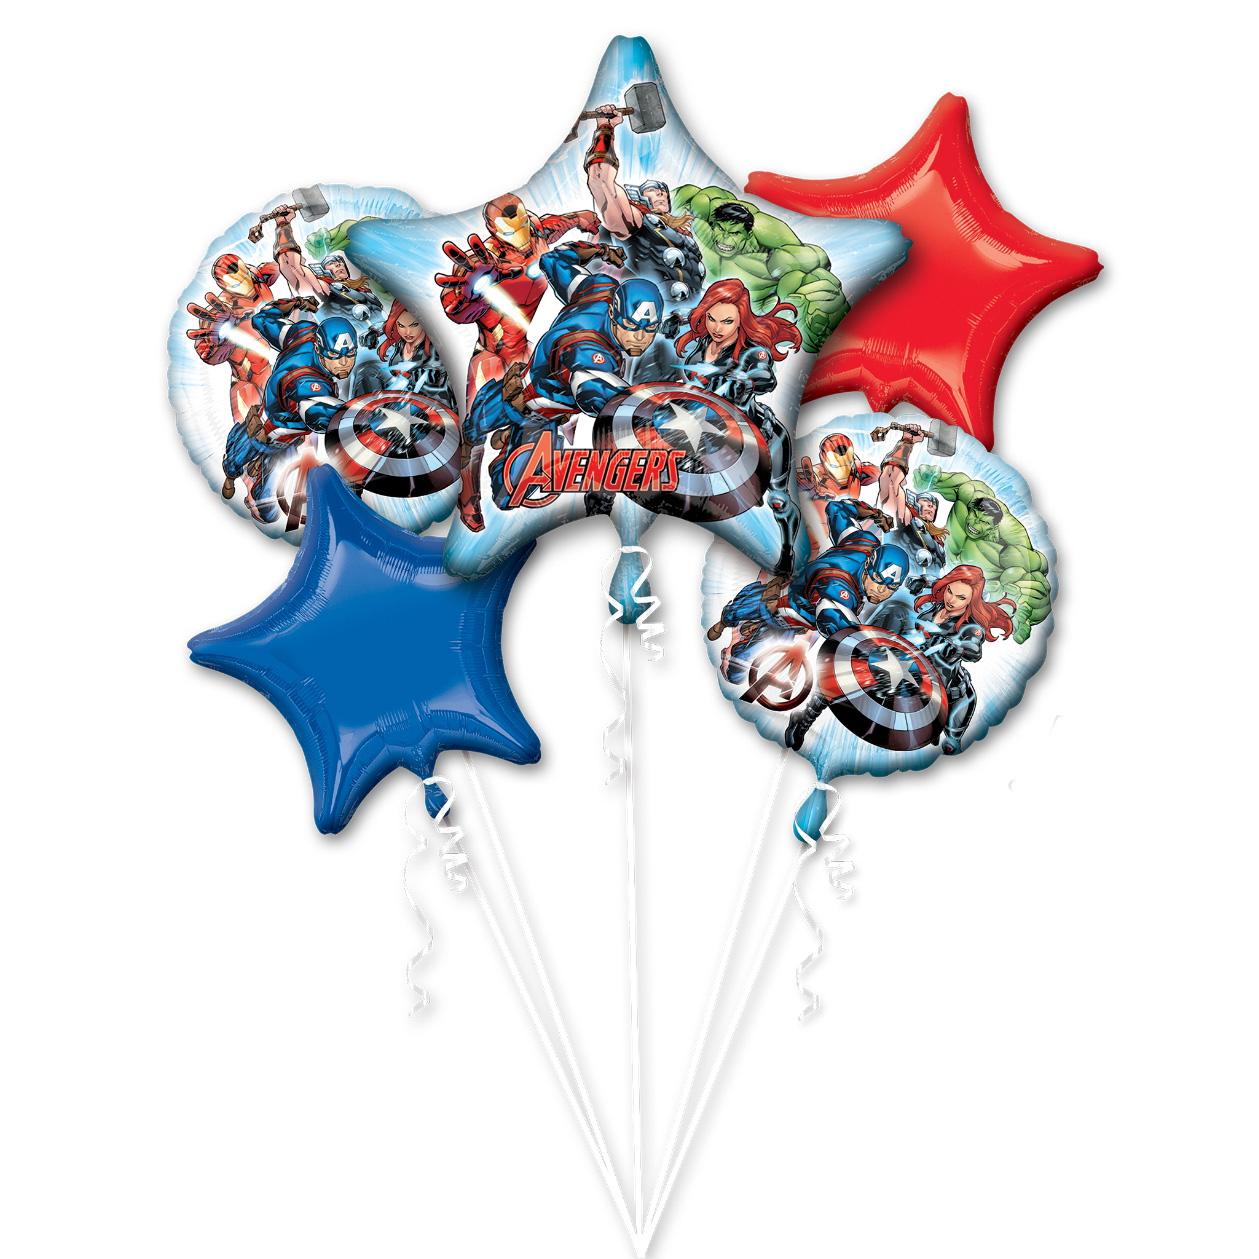 Avengers Animated Balloon Bouquet 5pcs Balloons & Streamers - Party Centre